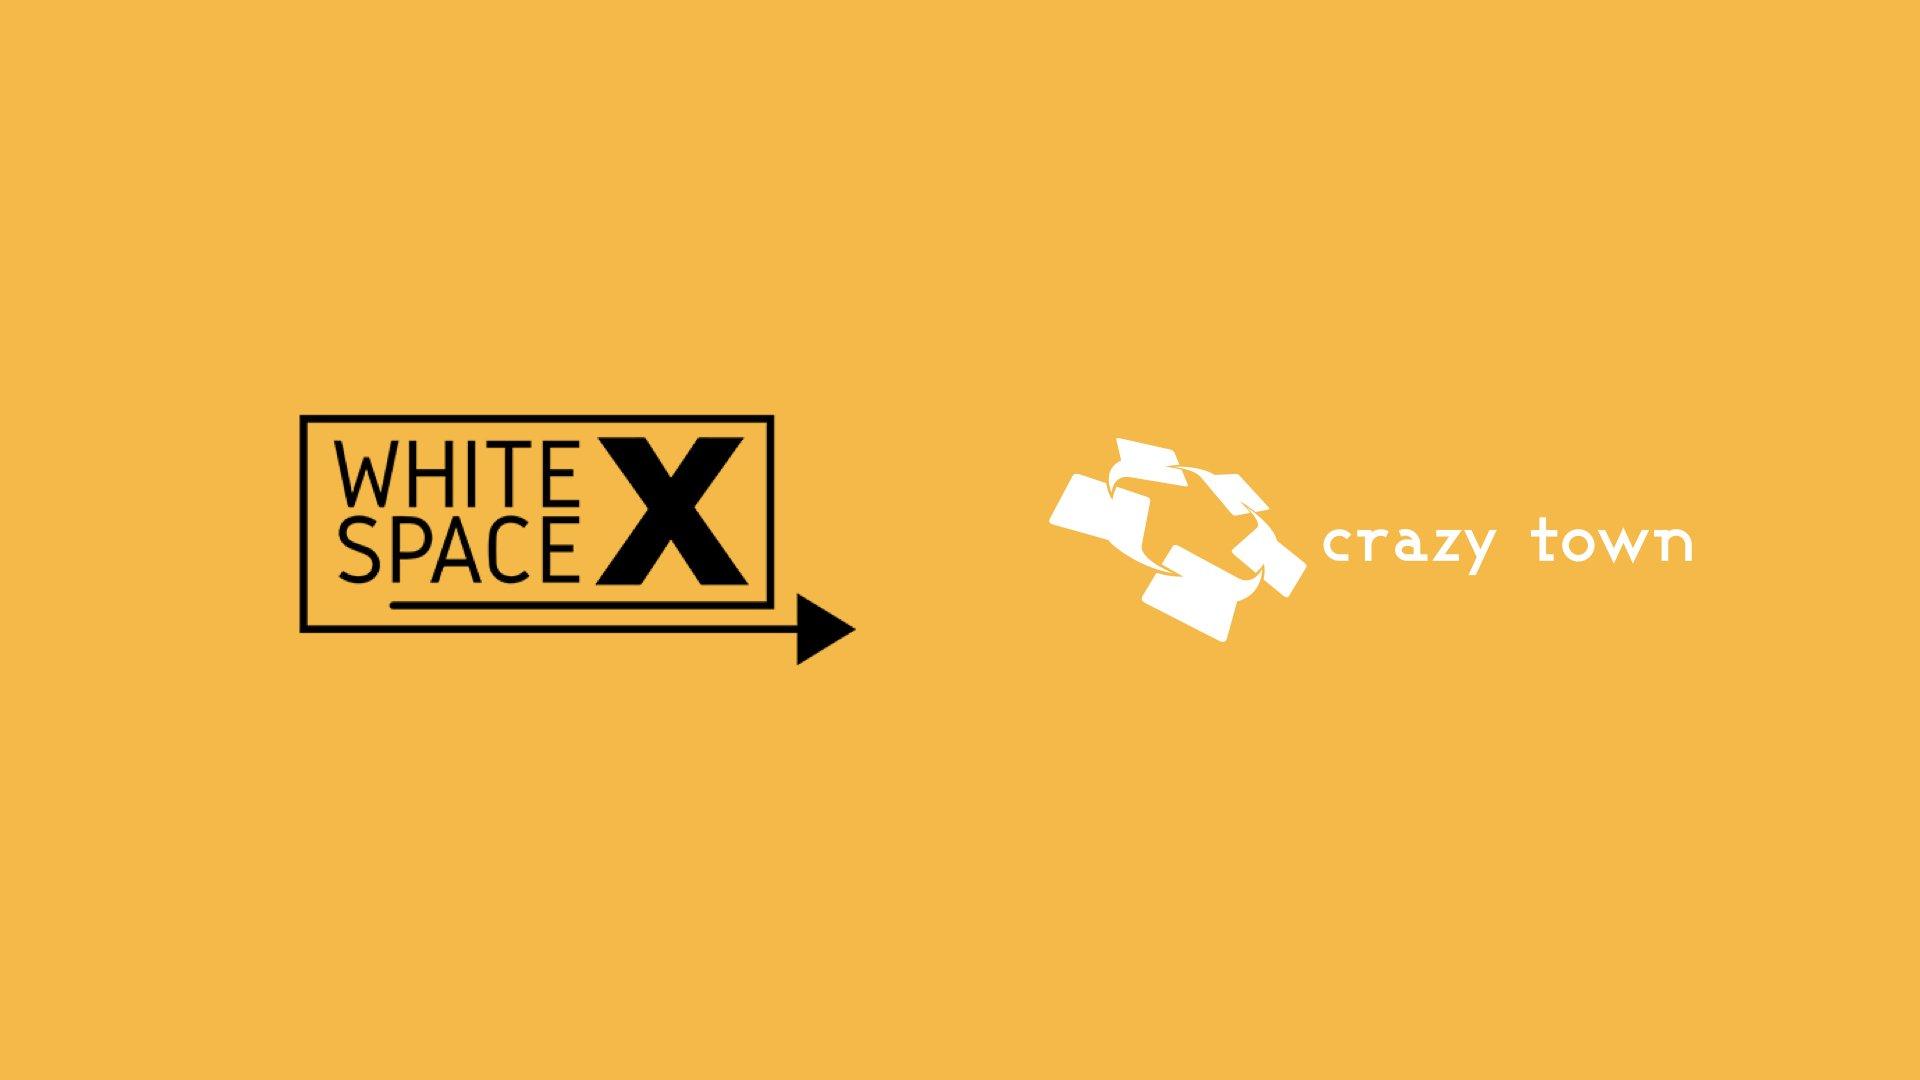 WhiteSpaceX and Crazy Town enter into partnership